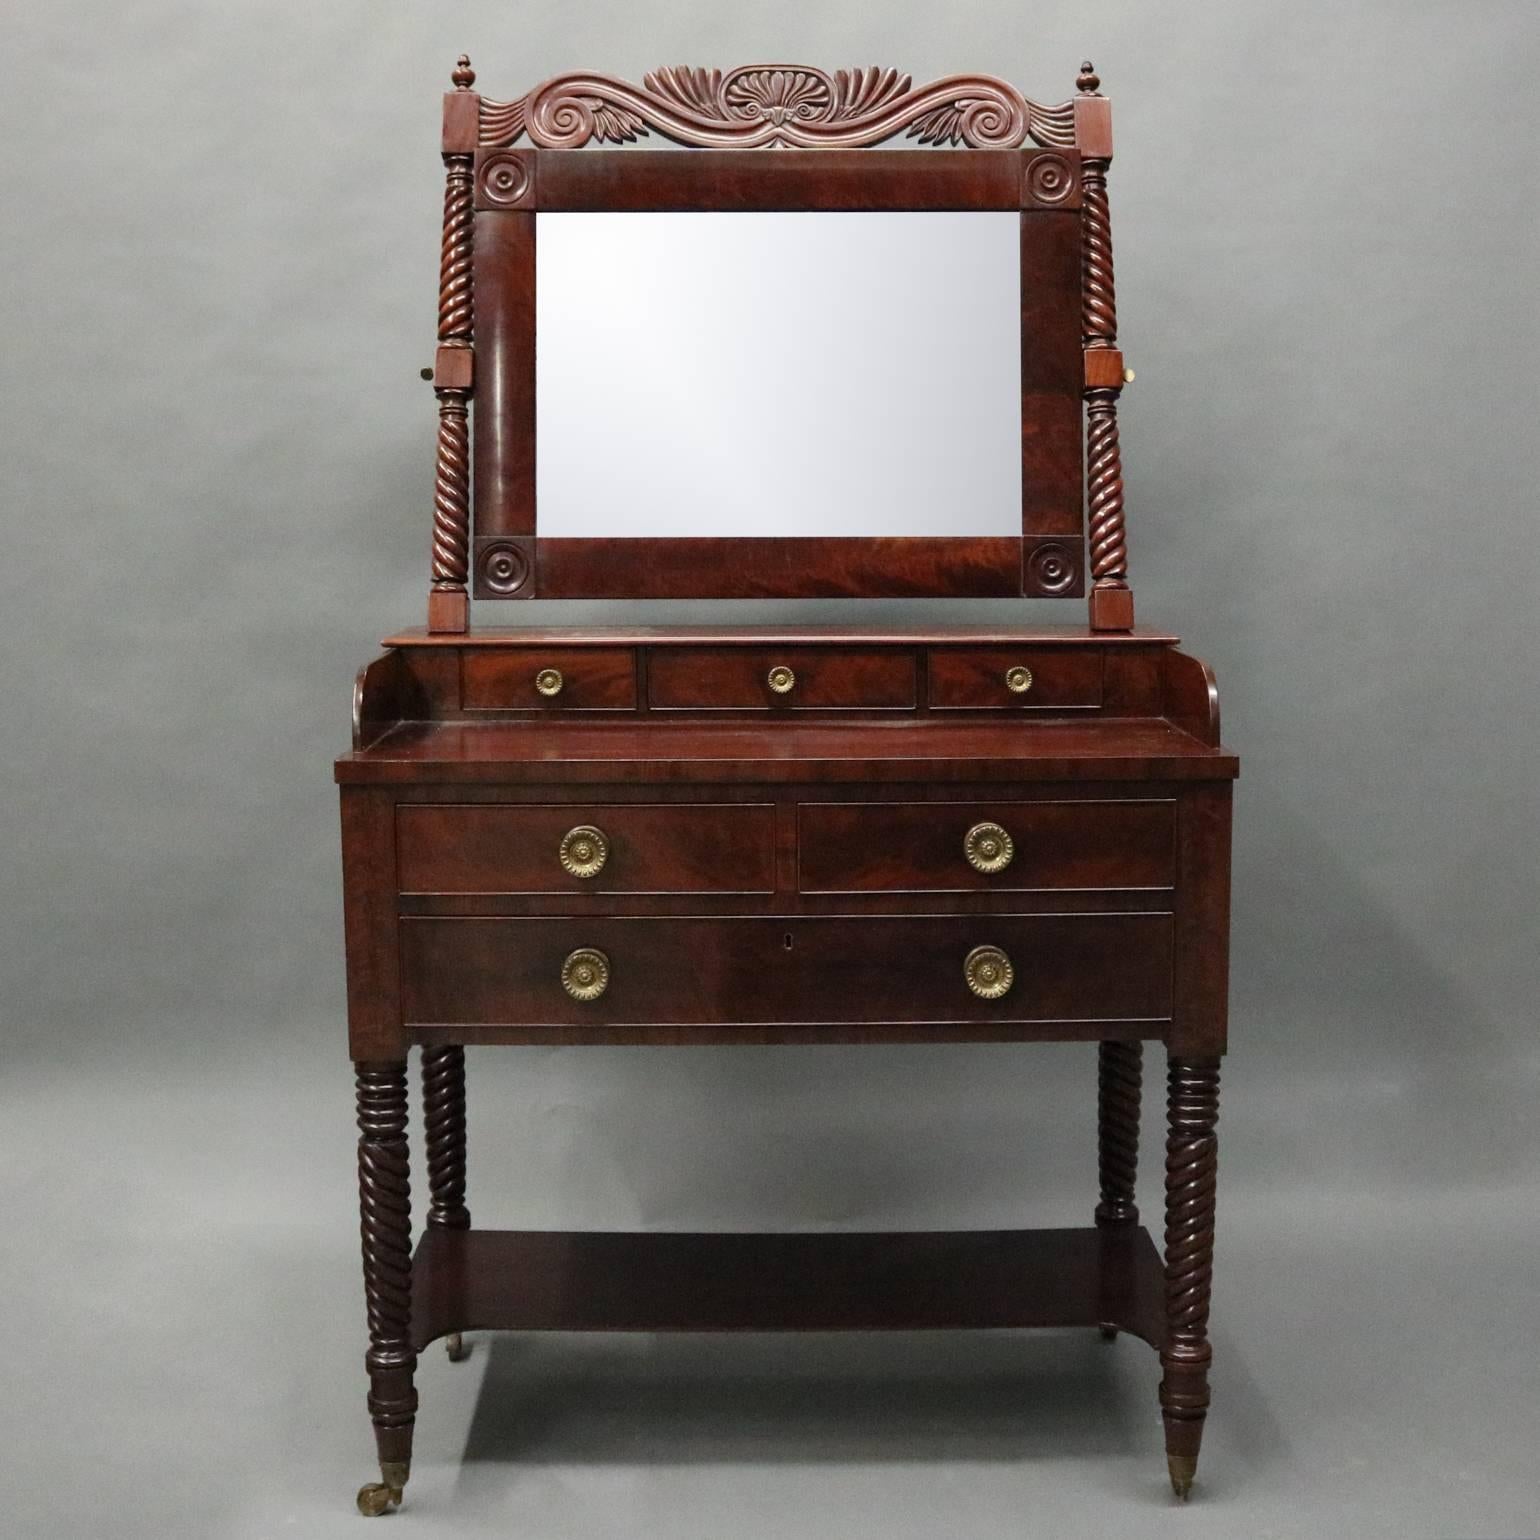 American Antique Carved Flame Mahogany and Bronze Sheraton Mirrored Vanity, circa 1820